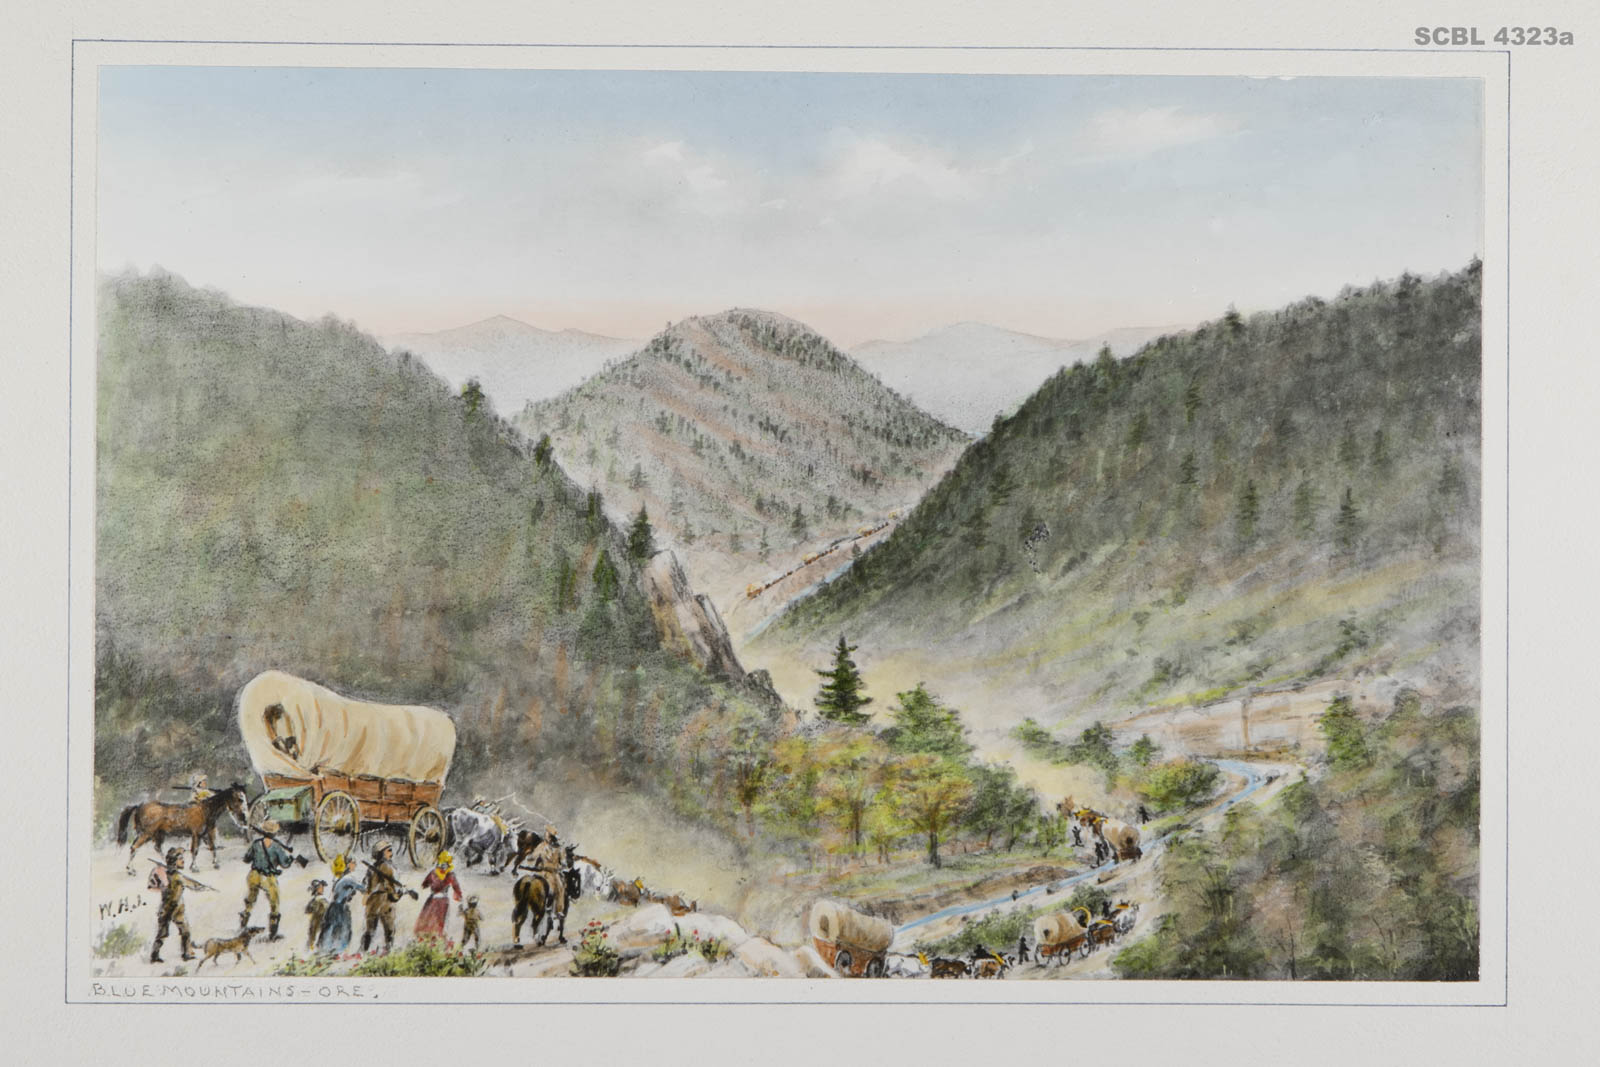 A painting of horses and a covered wagon crossing the mountains of Oregon